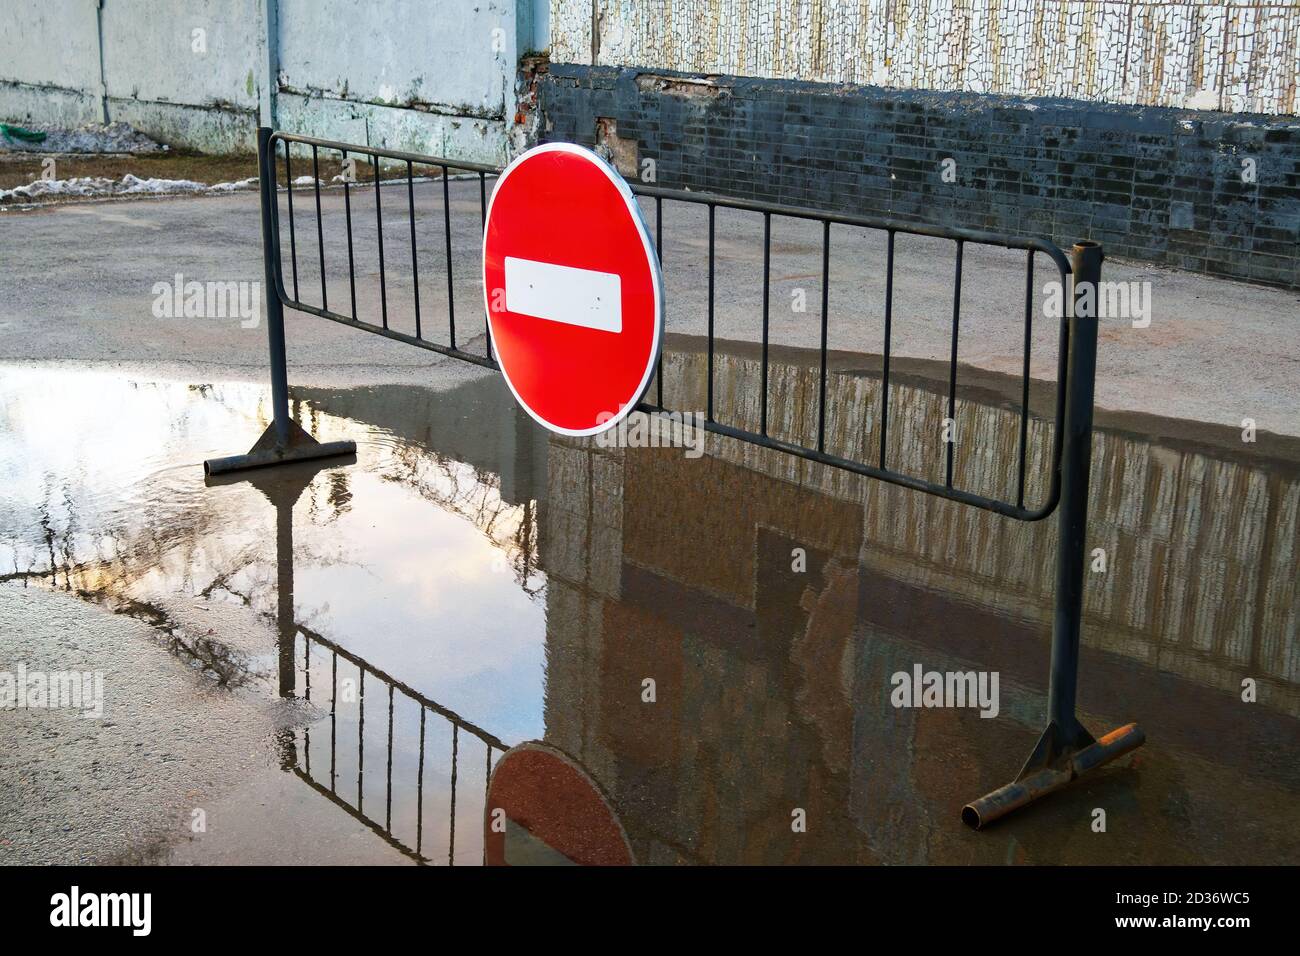 Road sign No entry for vehicular traffic on metal stand in puddle near building Stock Photo